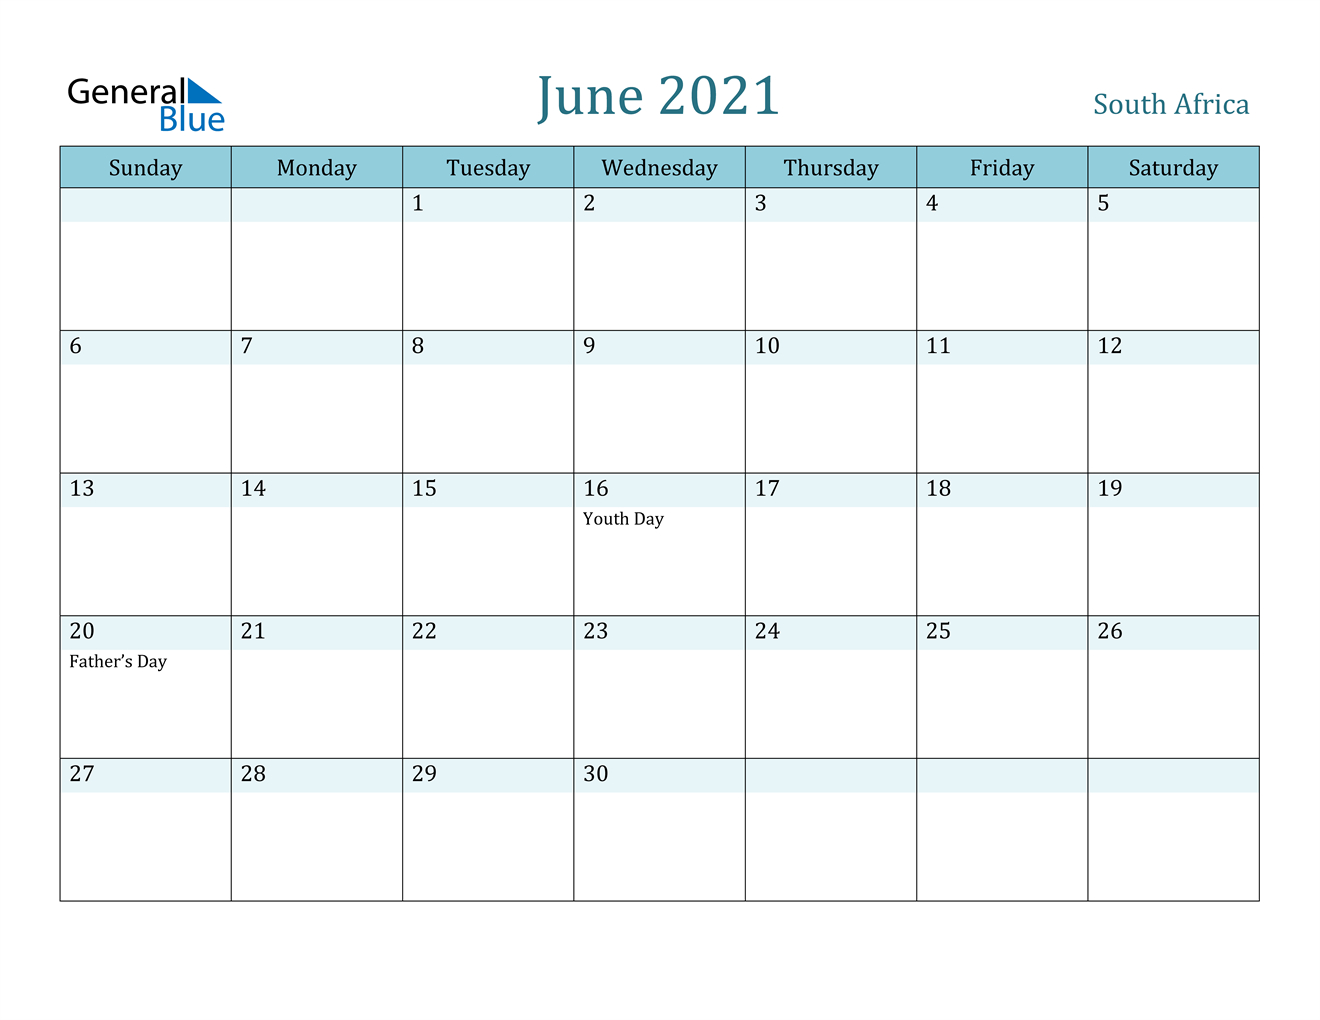 South Africa June 2021 Calendar With Holidays-Free 2021 June Calendars That Can Be Edited